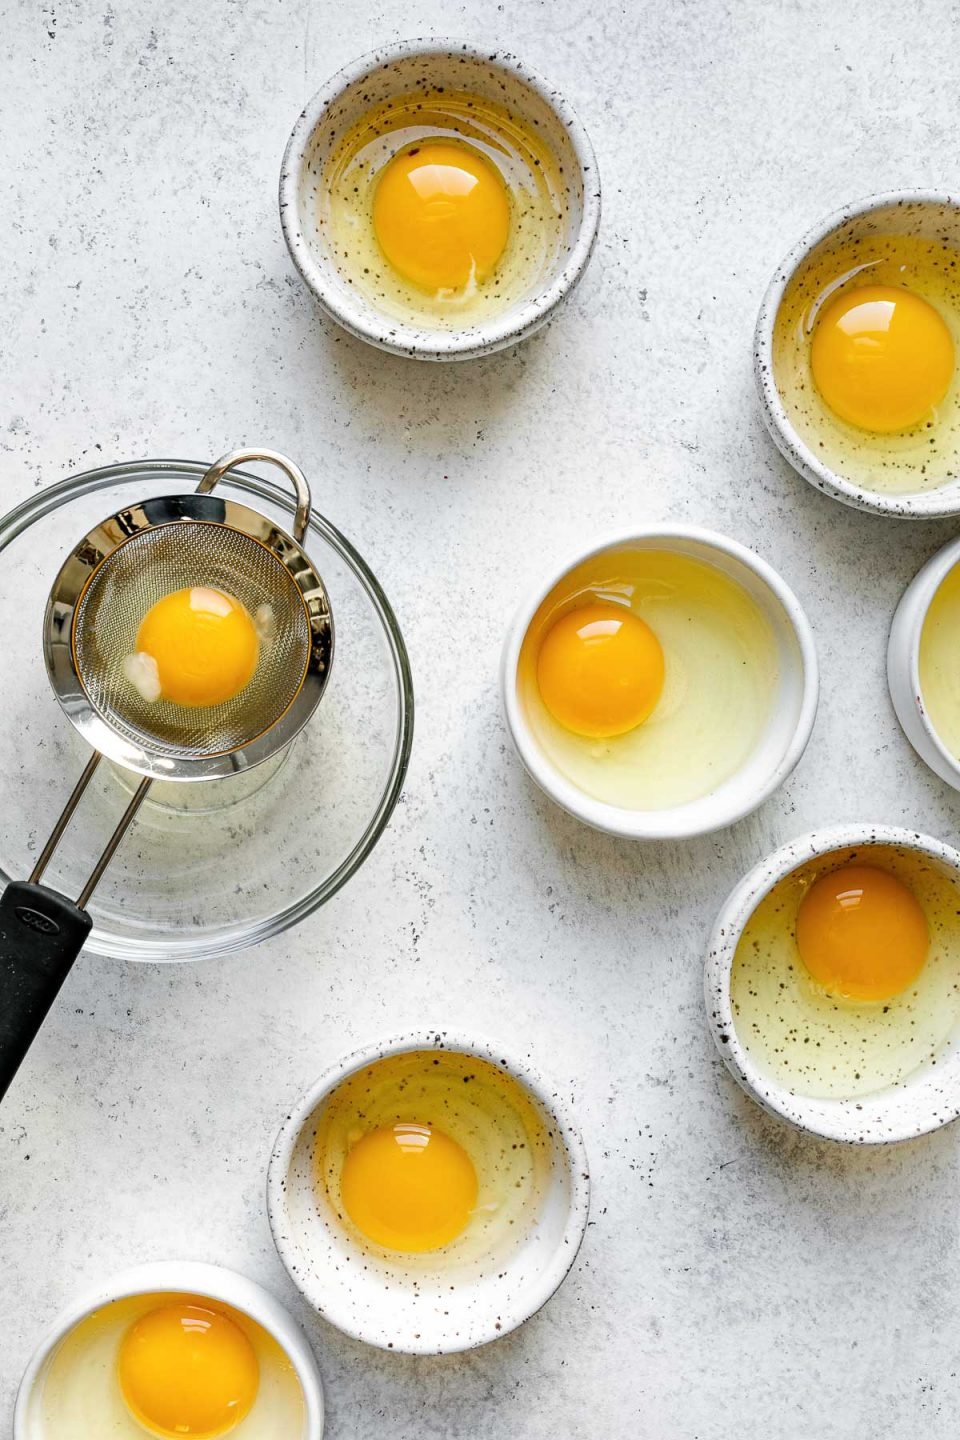 Poached eggs prep: eggs cracked into individual bowls. One egg is cracked in a small strainer to strain the whites. All of the bowls sit atop a white surface.